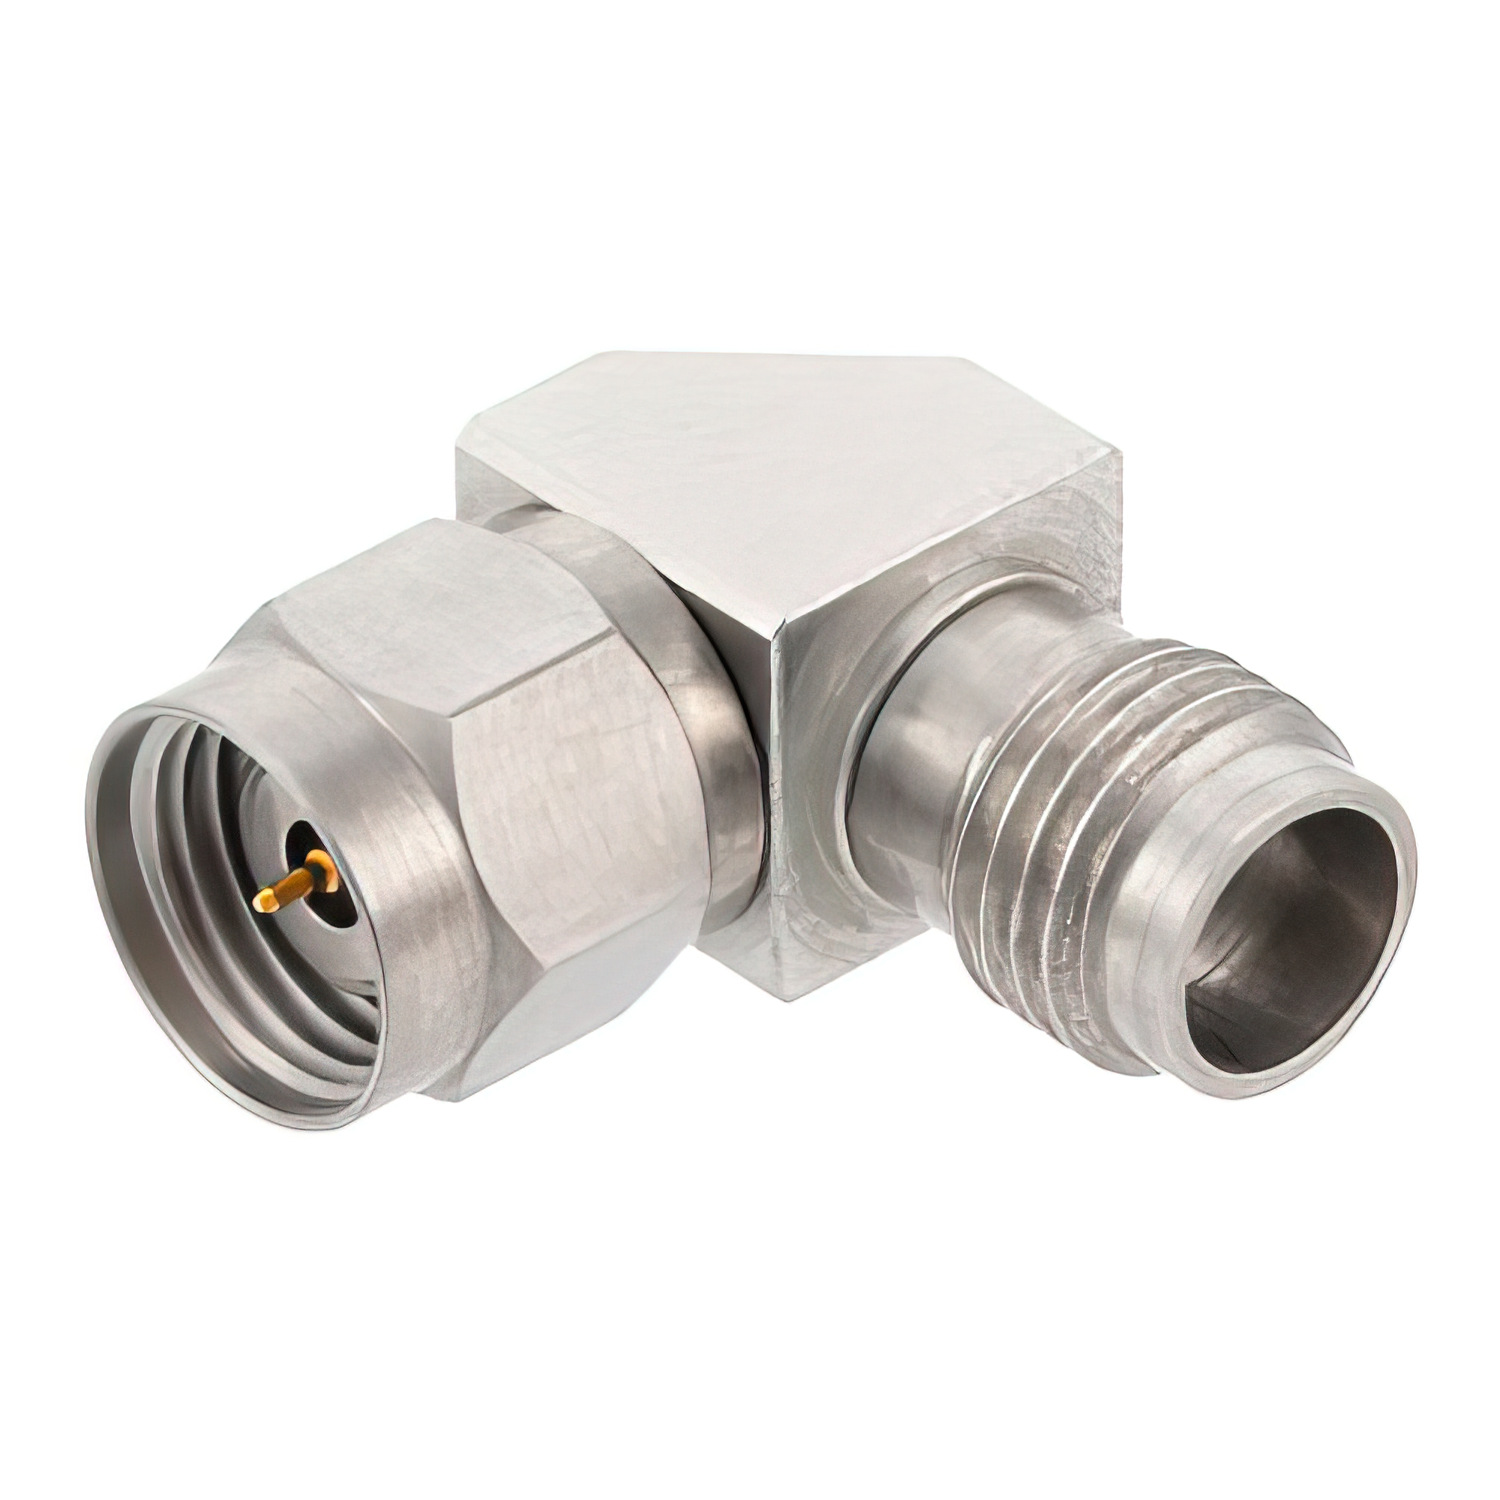 1.85mm Male to 2.4mm Female Miter Right Angle Adapter2